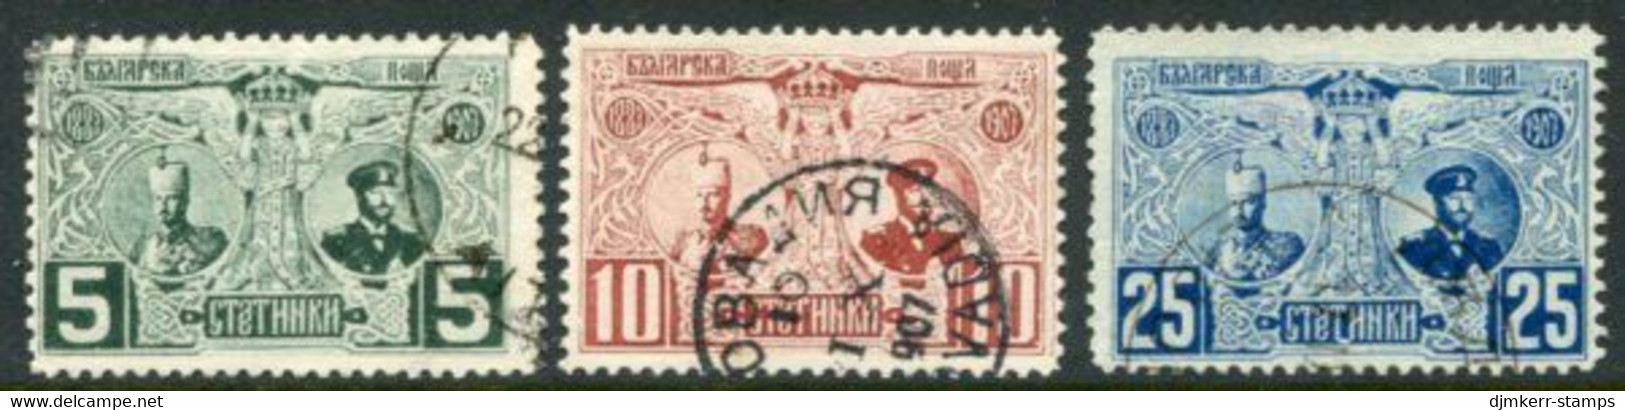 BULGARIA 1907 20th Anniversary Of Accession Used.  Michel 66-68 - Gebraucht